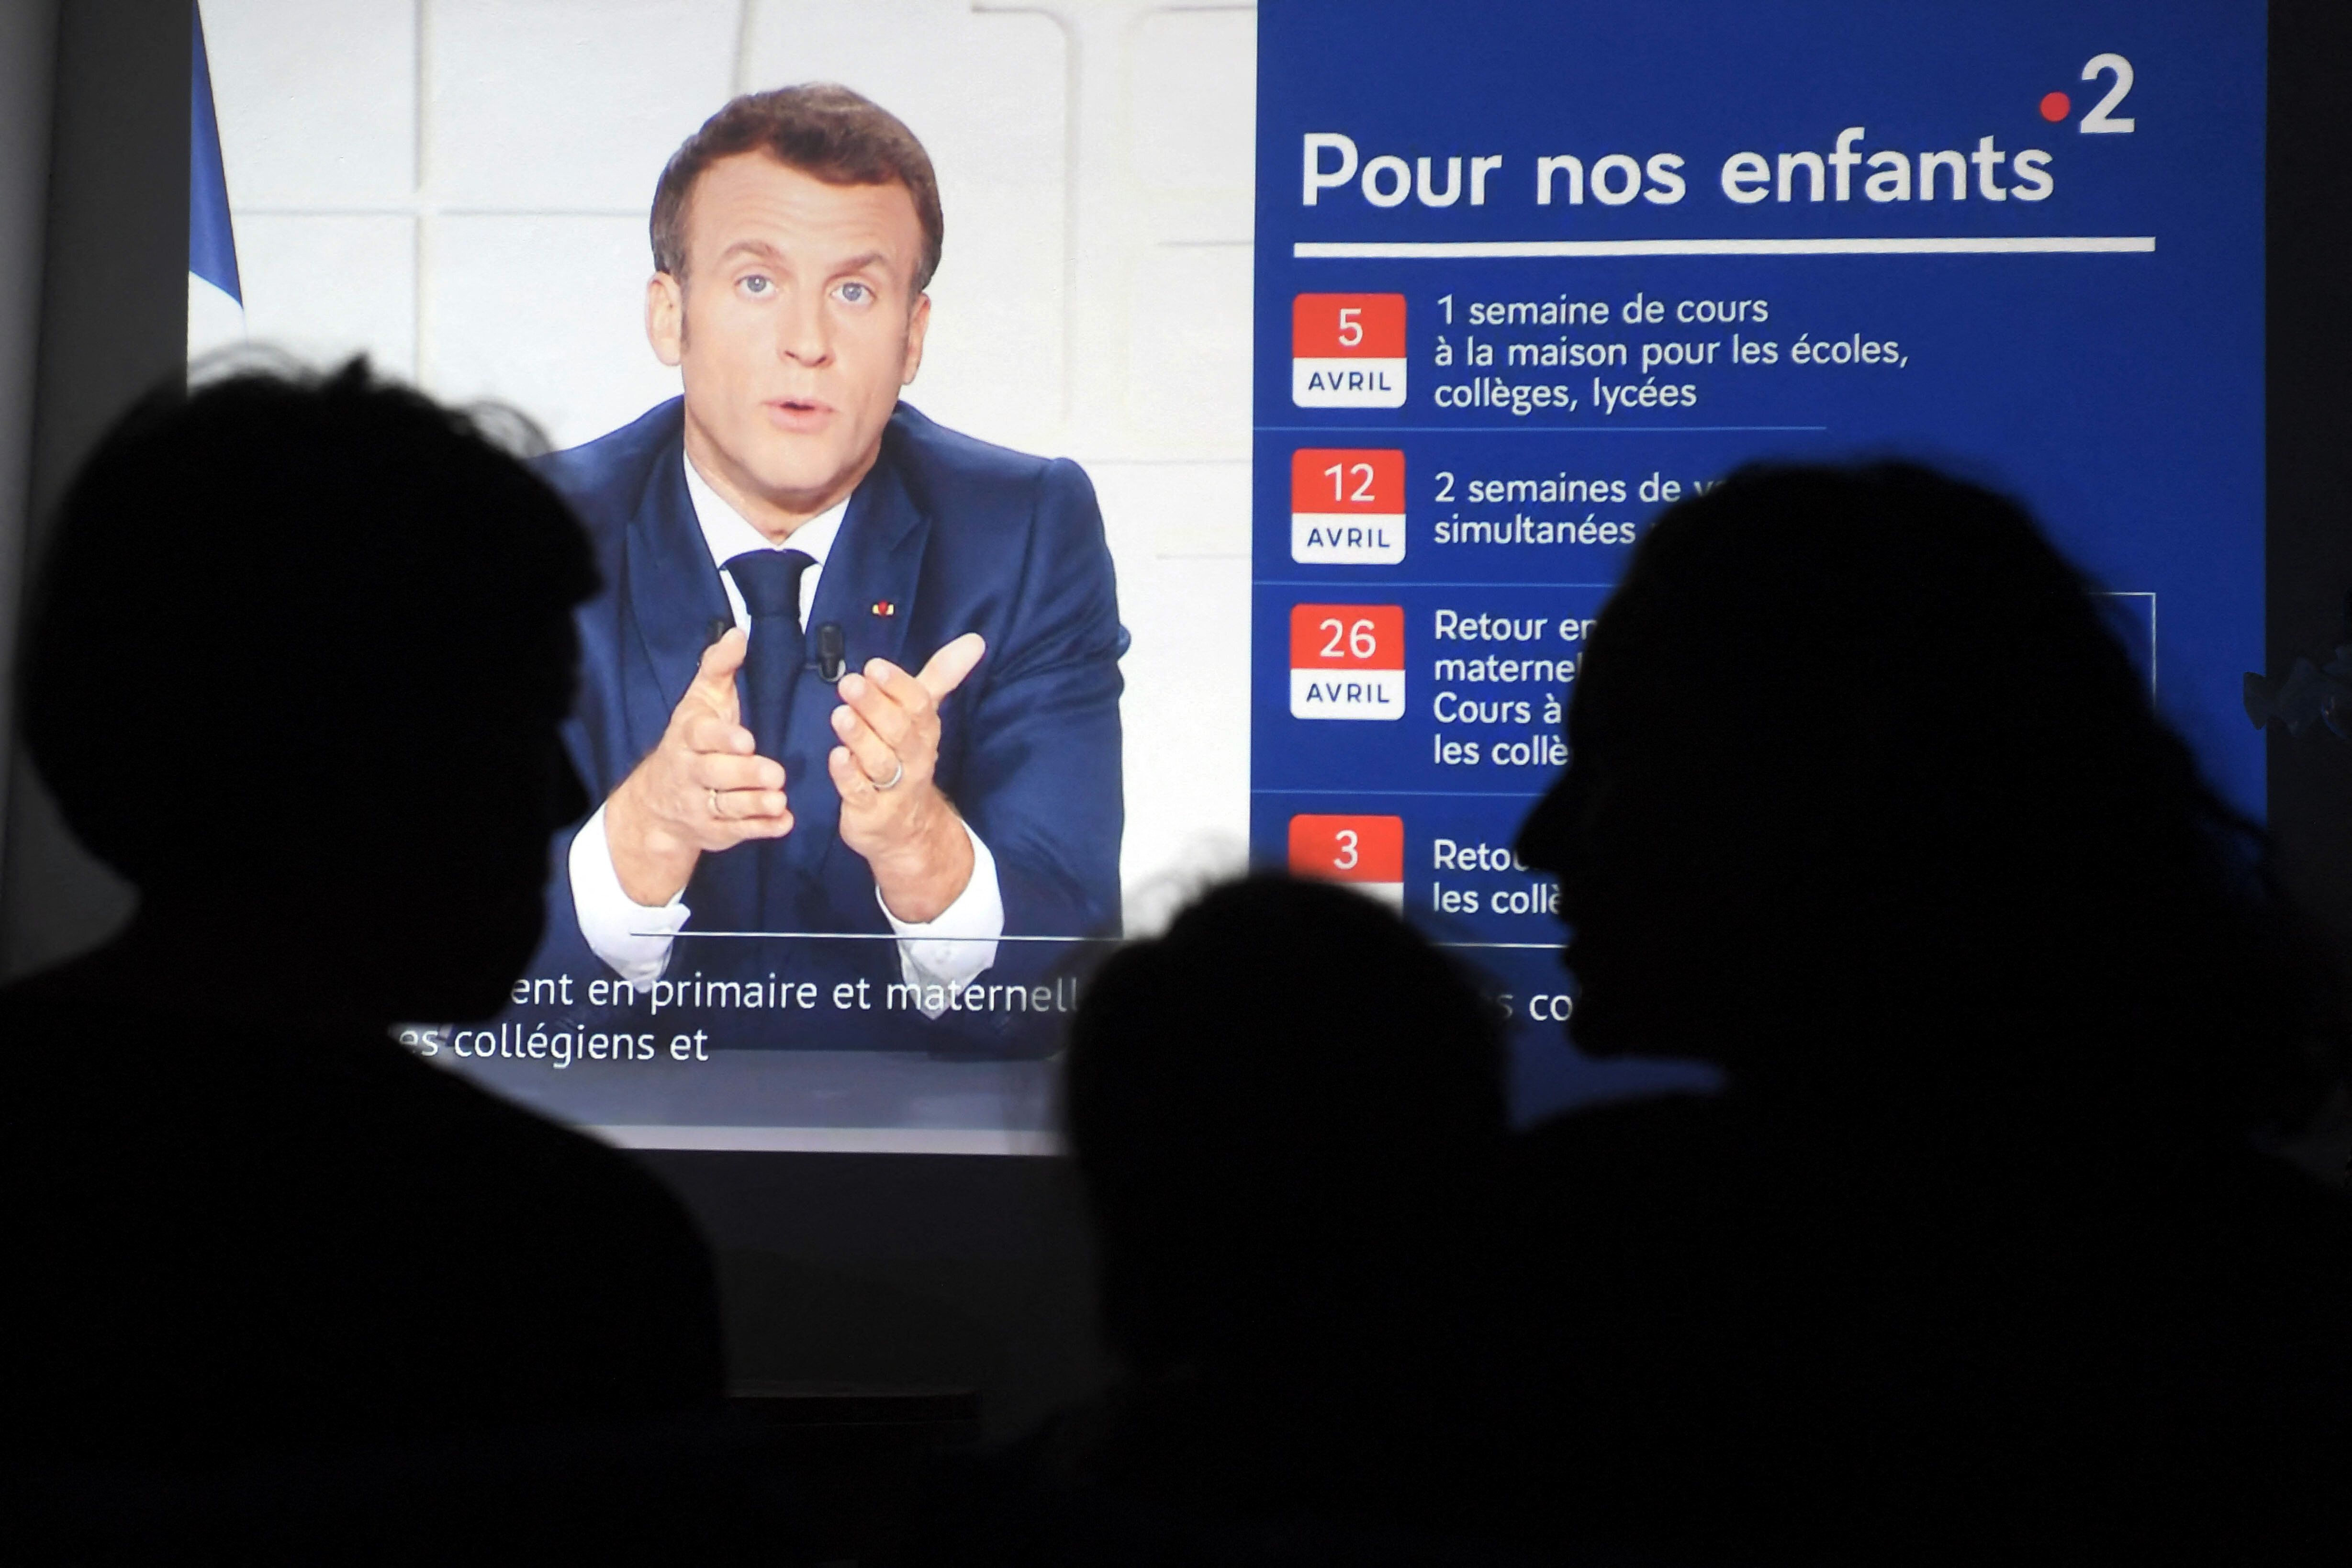 People listen to French president Emmanuel Macron delivering a broadcast speech from the Elysee palace in Paris, in Marseille